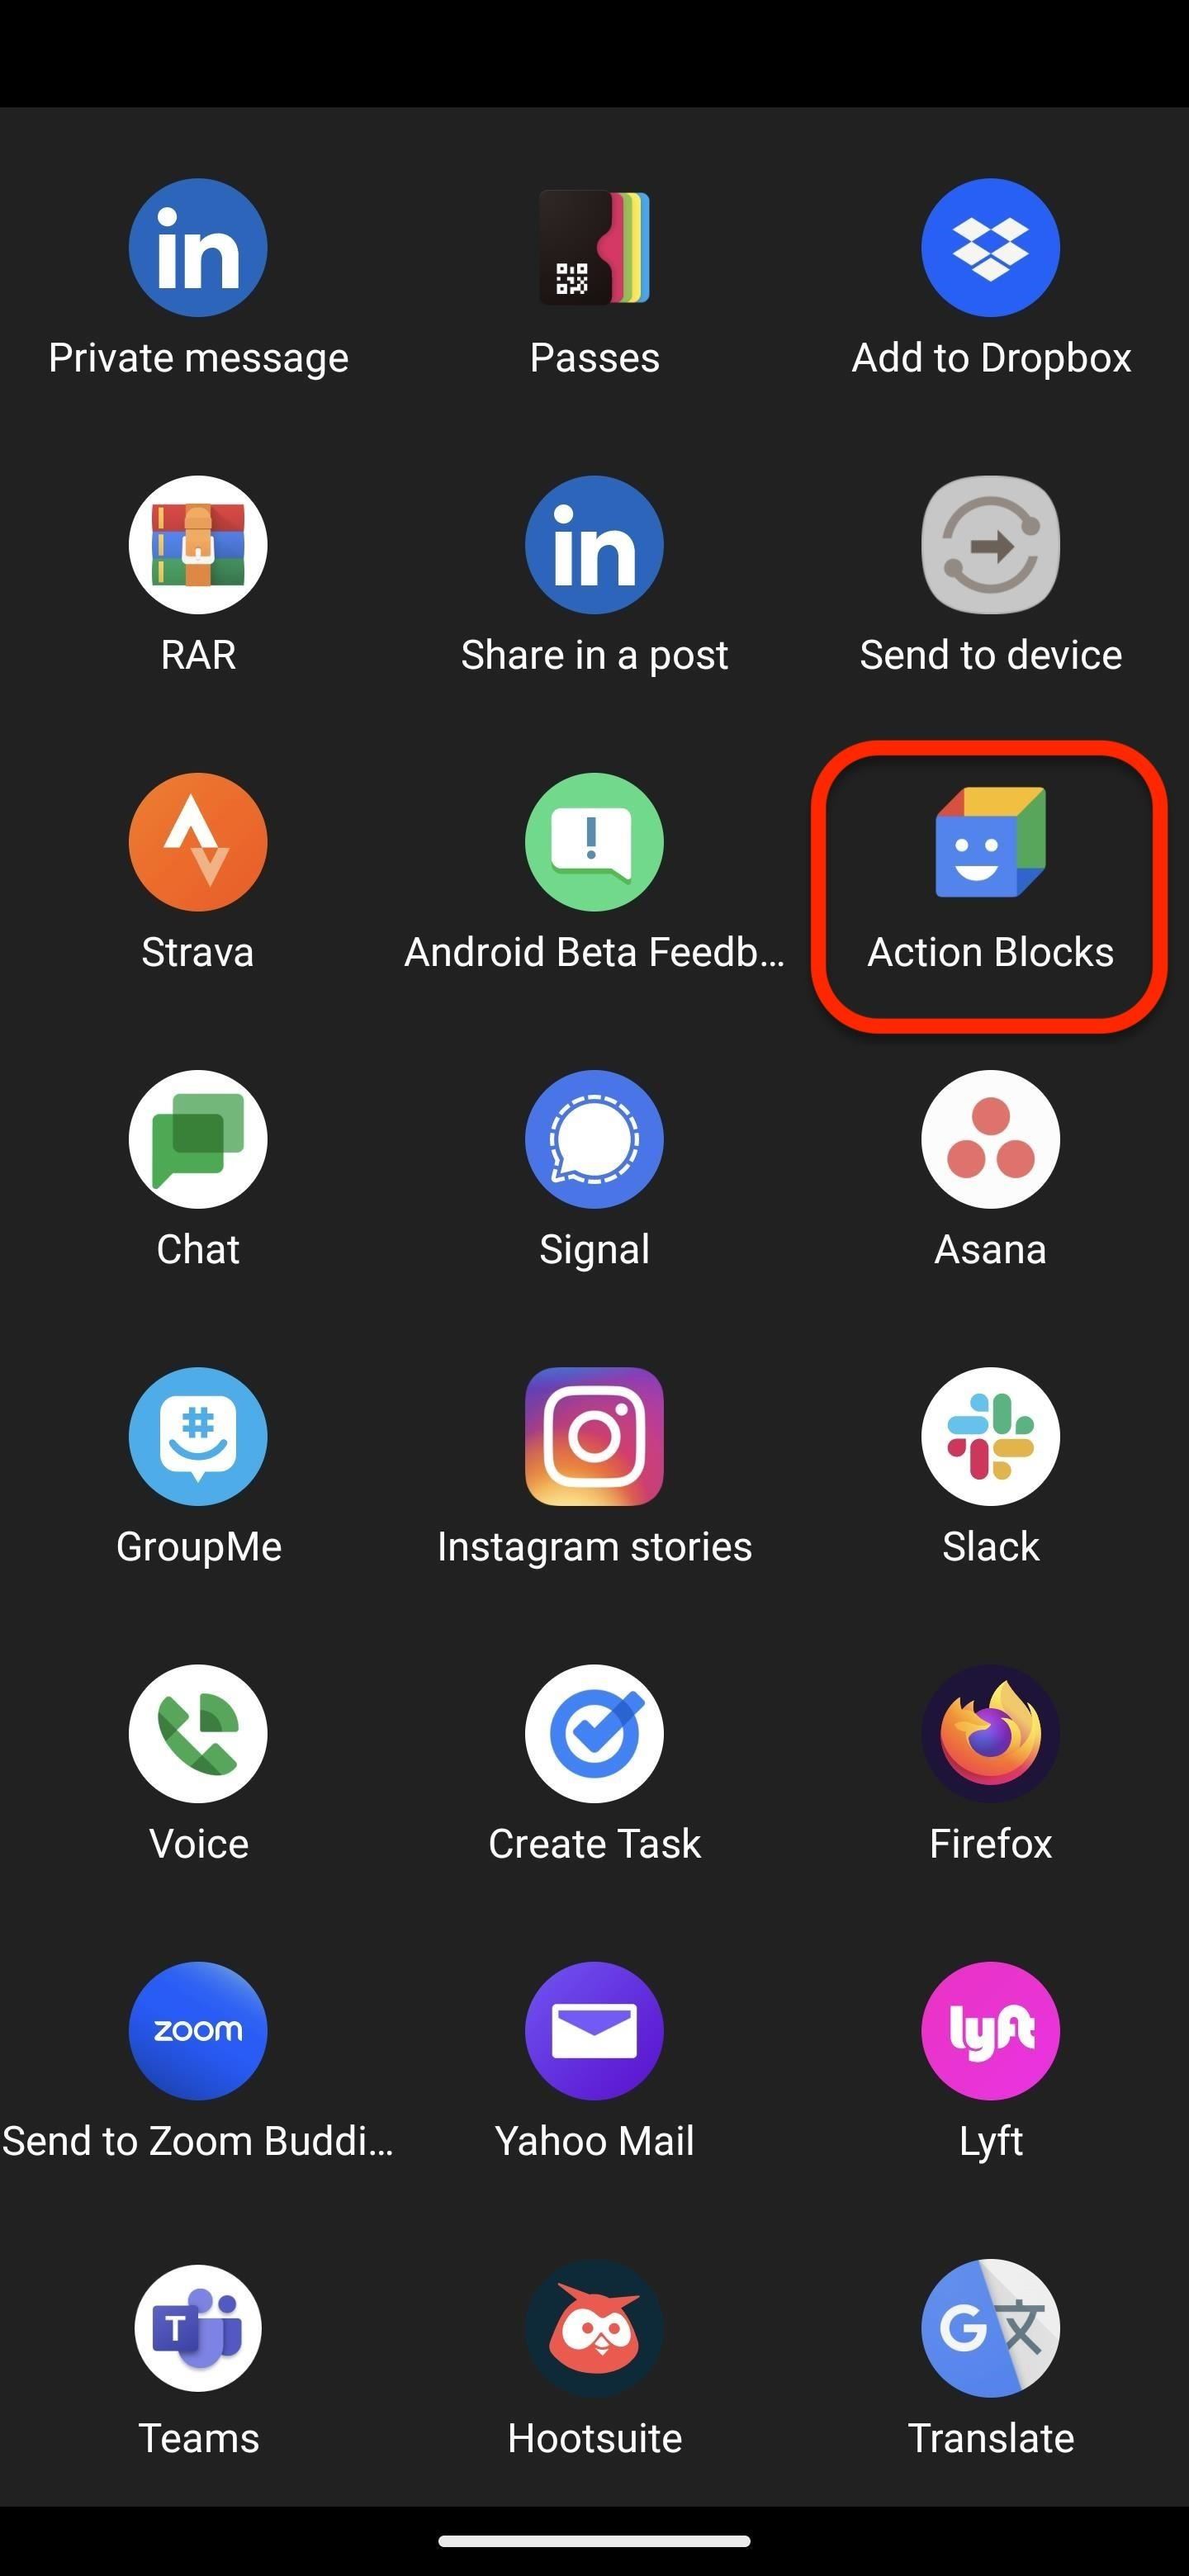 Create Home Screen Shortcuts to Almost Anything on Android — Videos, Music Playlists, Social Profiles, and More